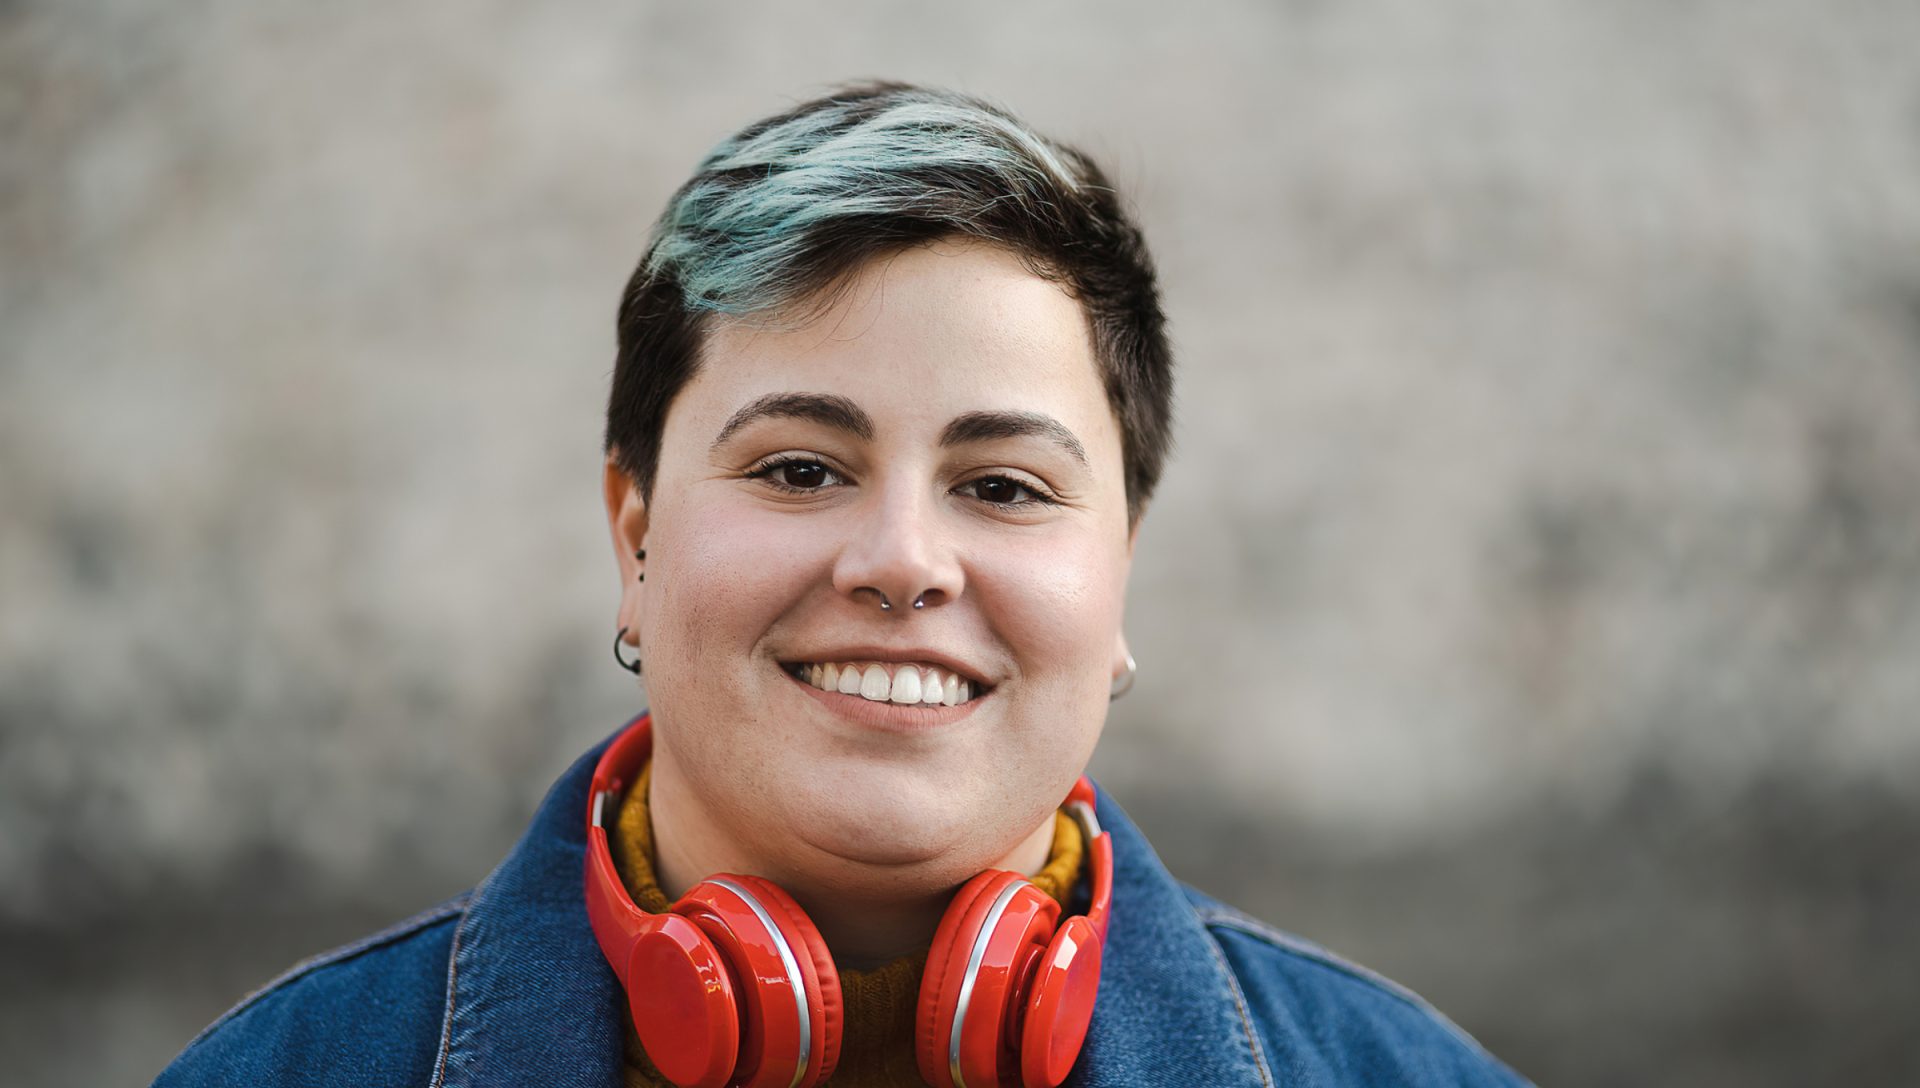 a woman with short hair and dark eyes is wearing red headphones while standing outside and smiling at the camera